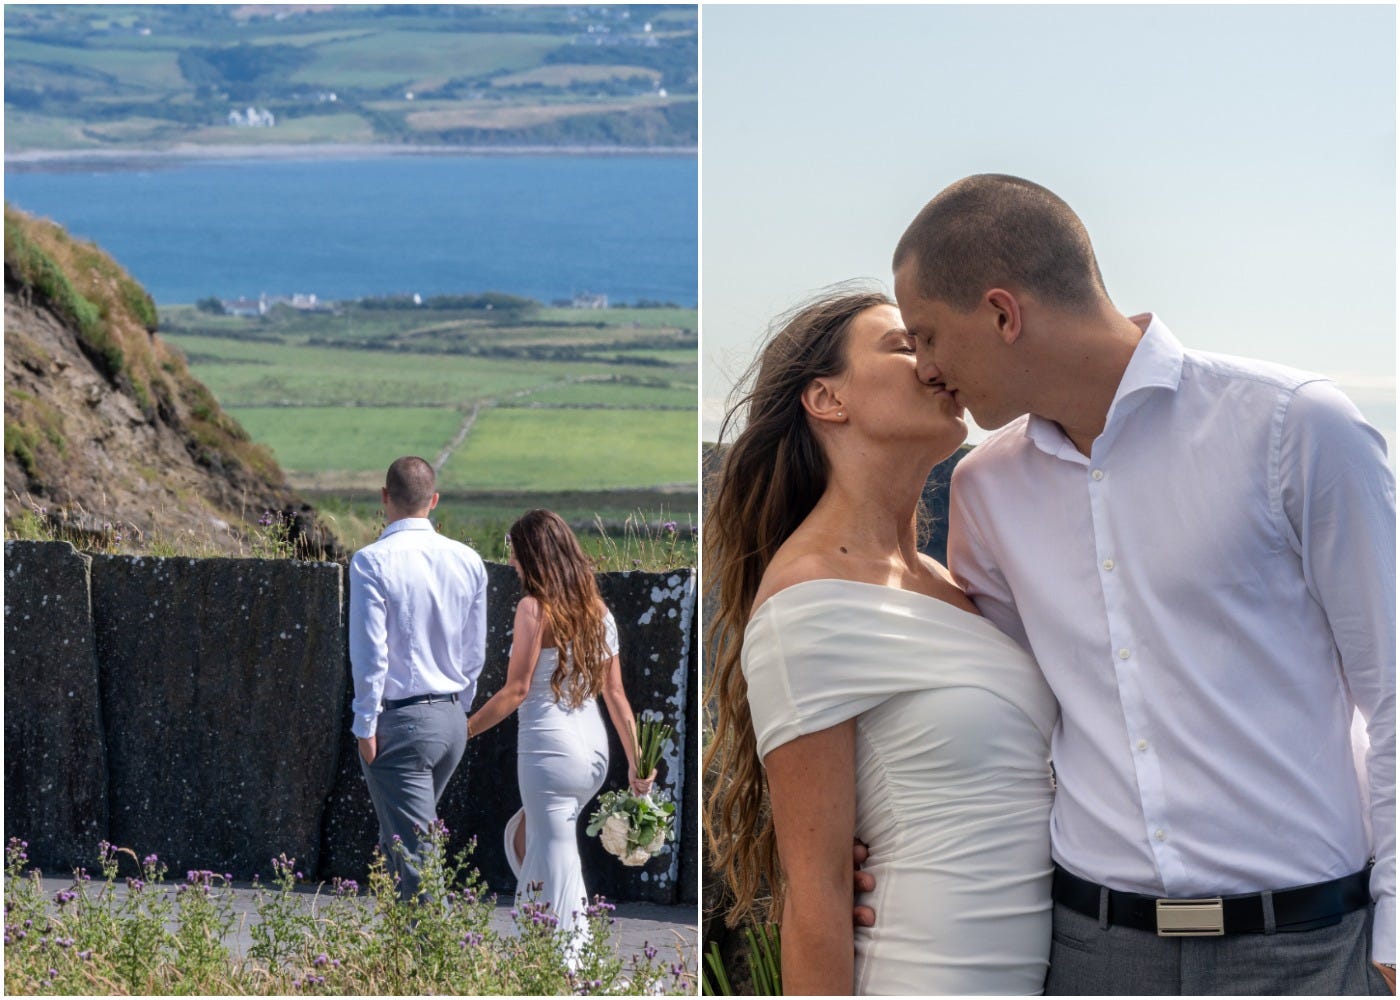 A side by side shot of Andela and Mateo Rako, the couple photographed by a stranger on the Cliffs of Moher.